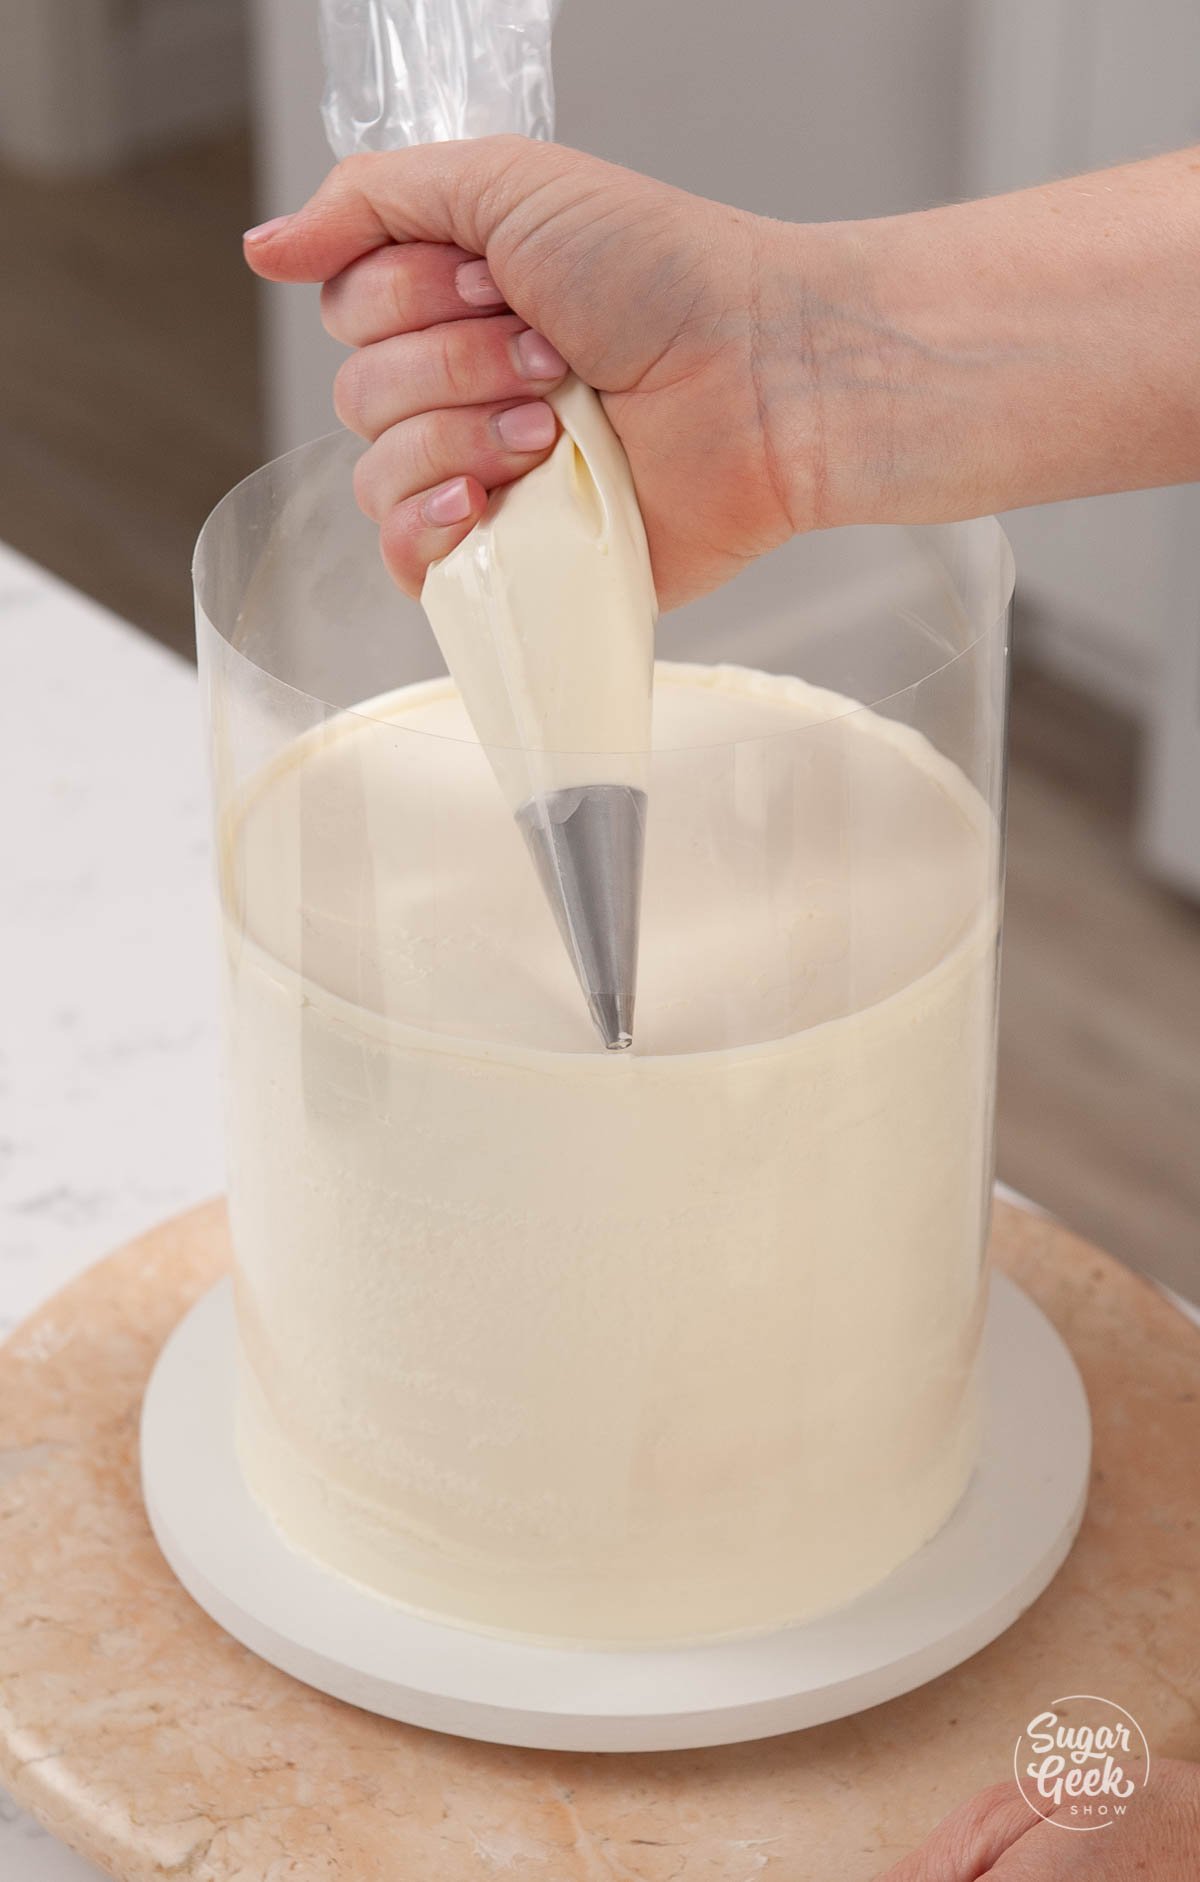 piping buttercream into the gap of the cake